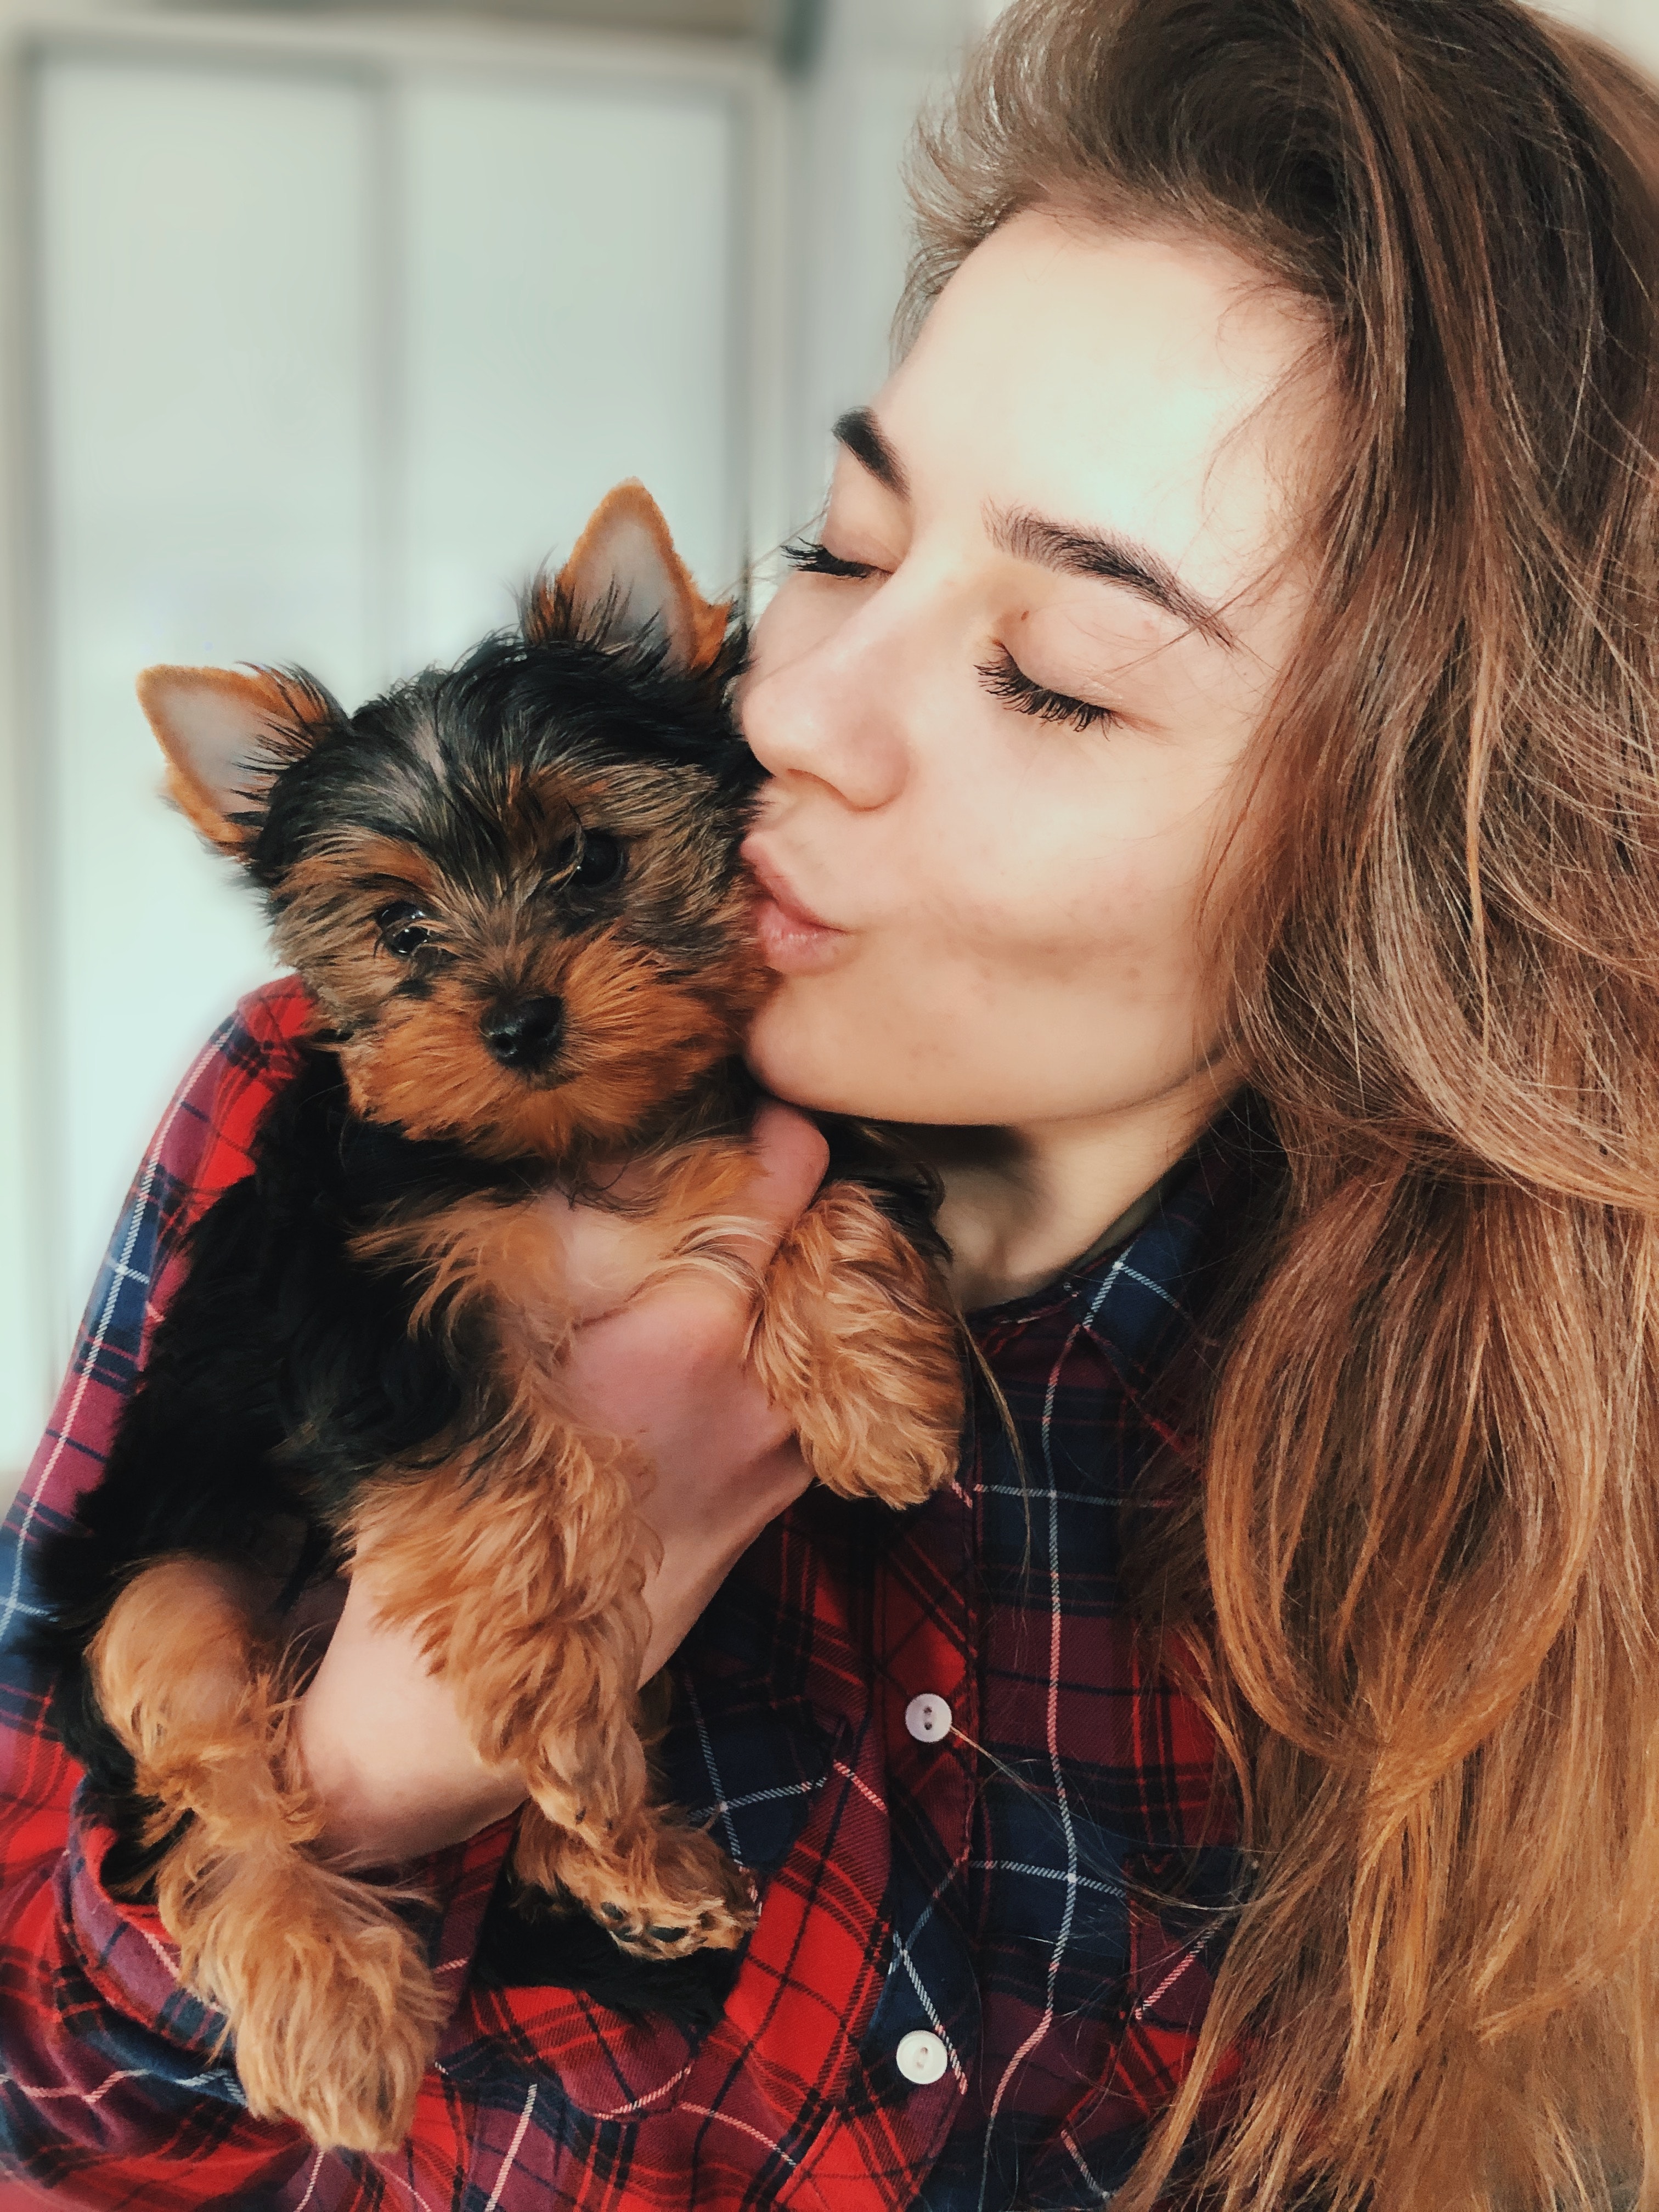 A woman in a plaid shirt holding a yorkie, both looking happy together on a sunny day